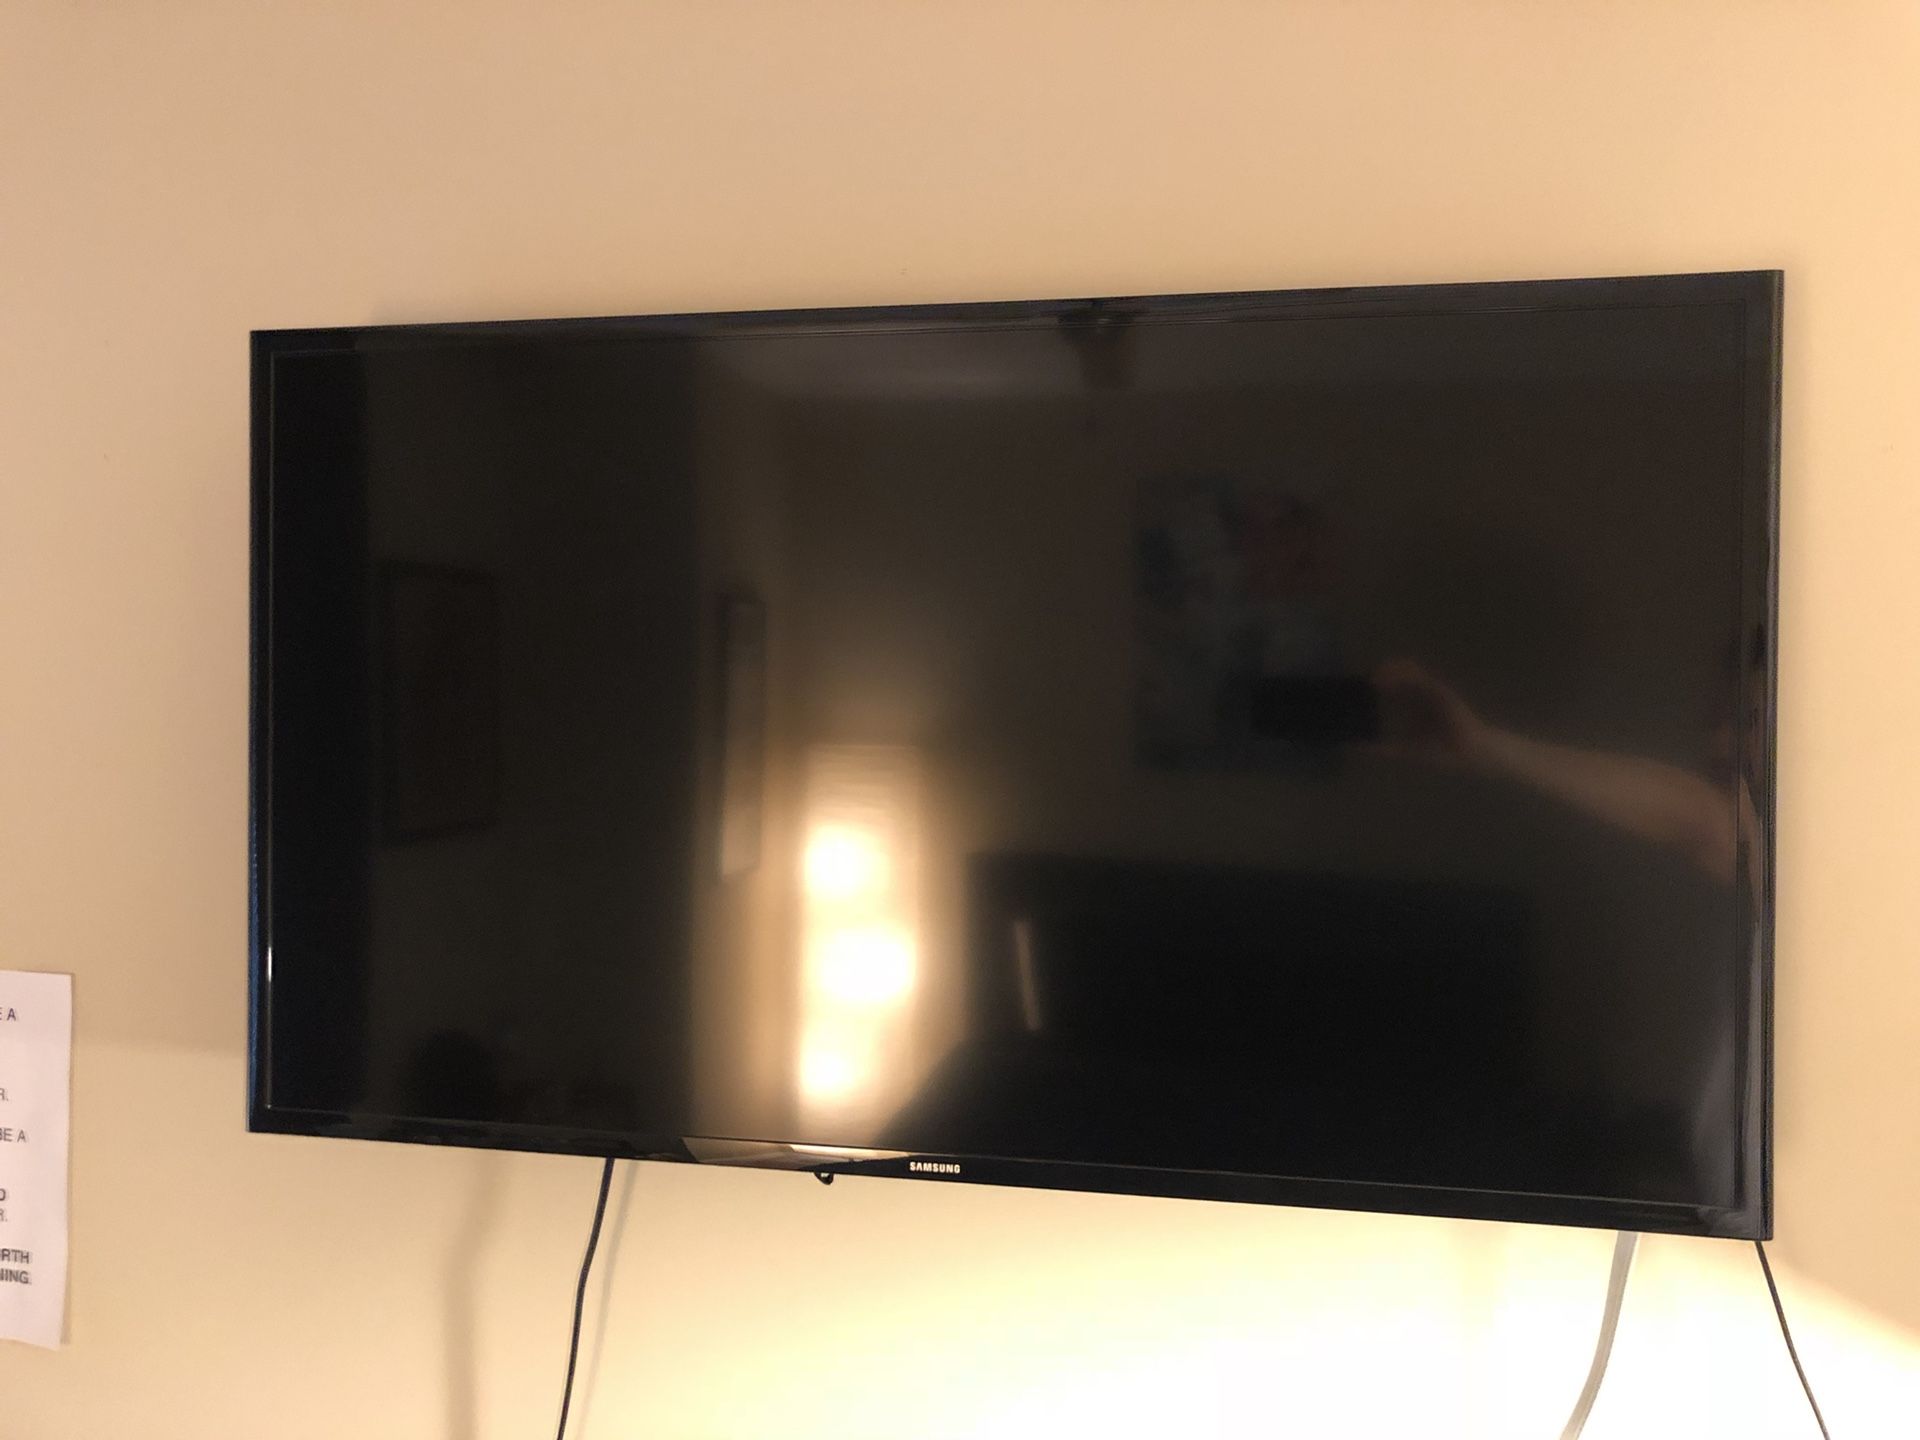 40in TV - Samsung Smart TV. Stand not included